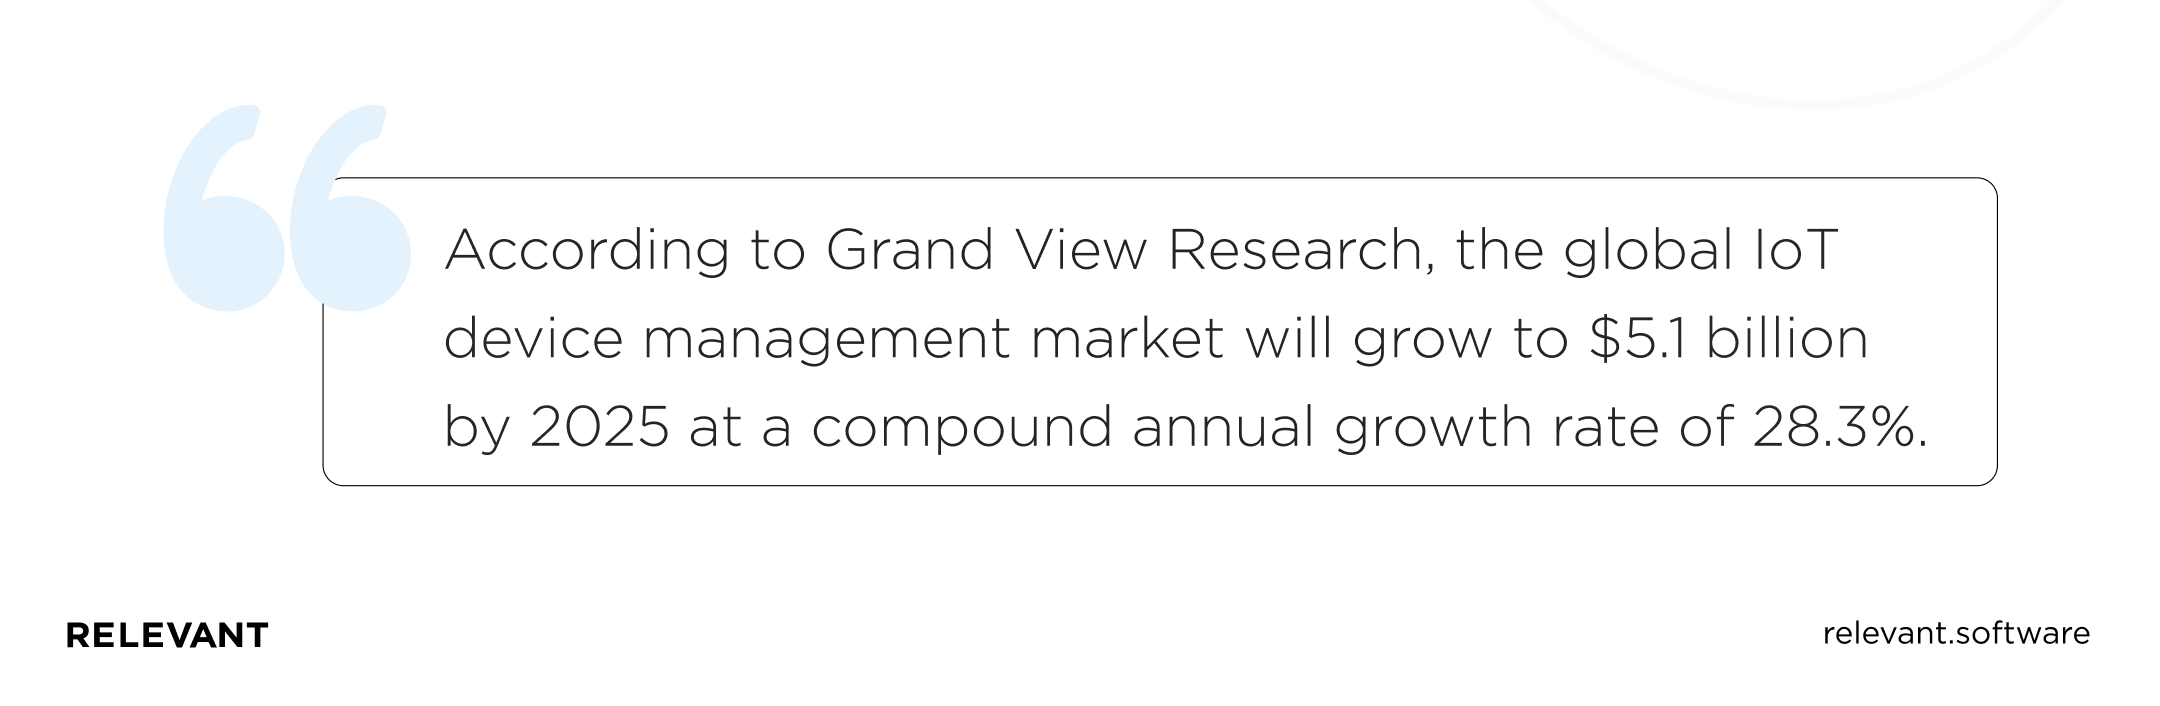 According to Grand View Research, the global IoT device management market will grow to .1 billion by 2025 at a compound annual growth rate of 28.3%